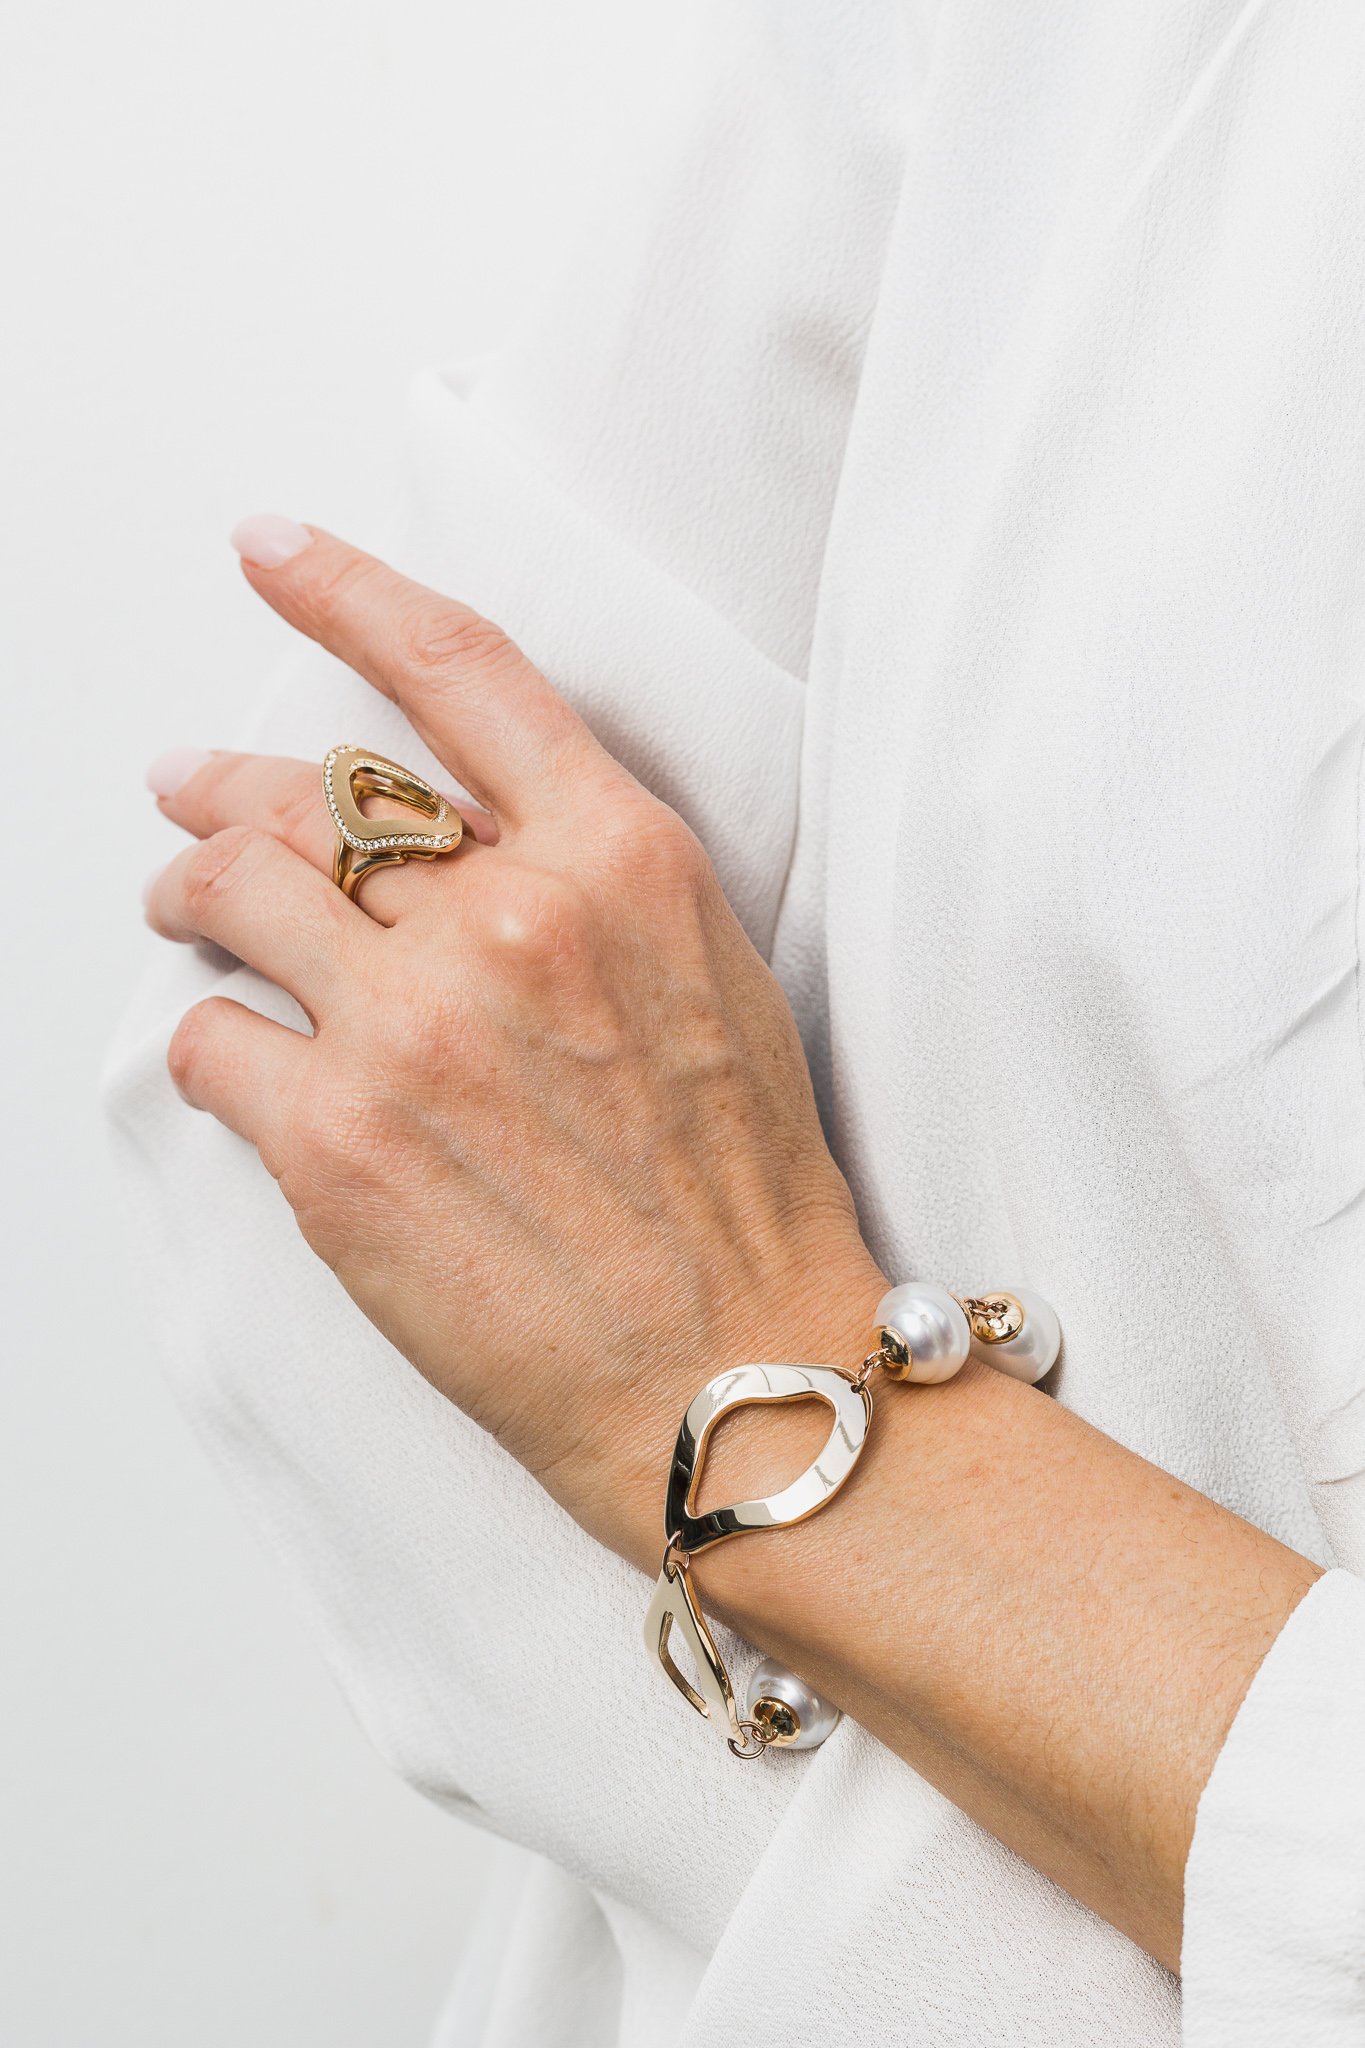 Canberra product photographer - jewellery against soft white clothes